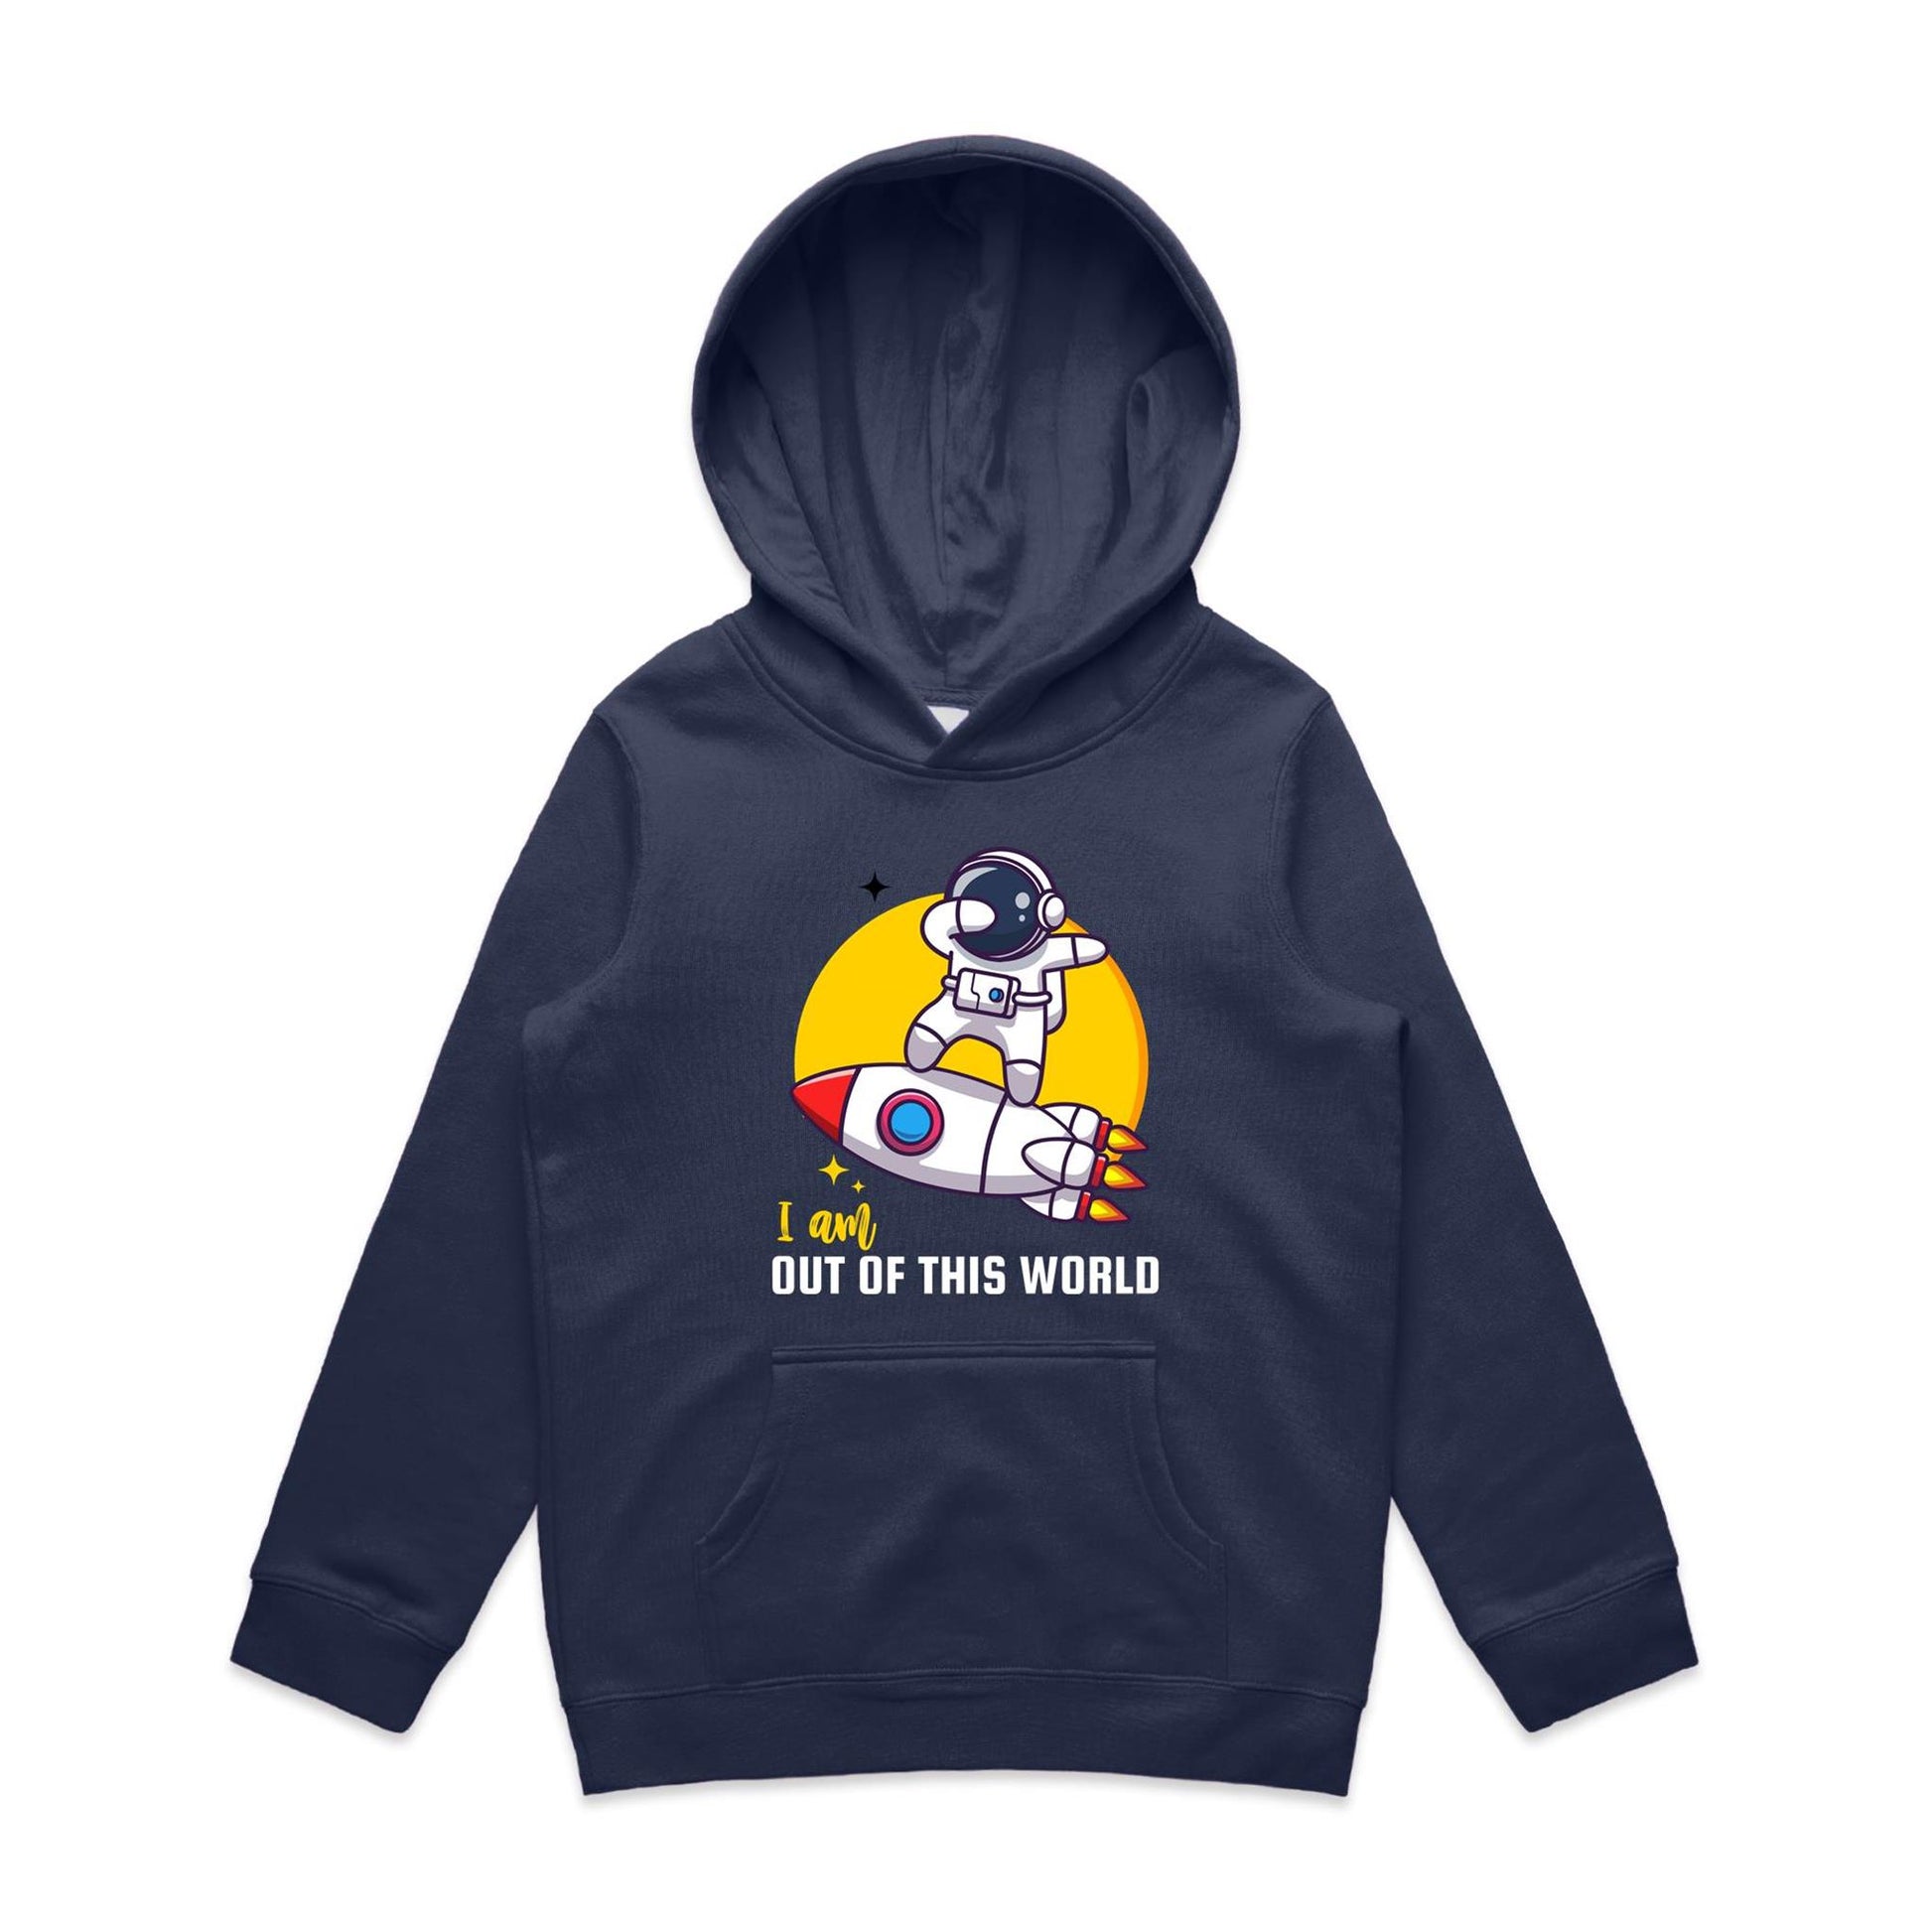 I Am Out Of This World, Astronaut - Youth Supply Hood Midnight Blue Kids Hoodie Sci Fi